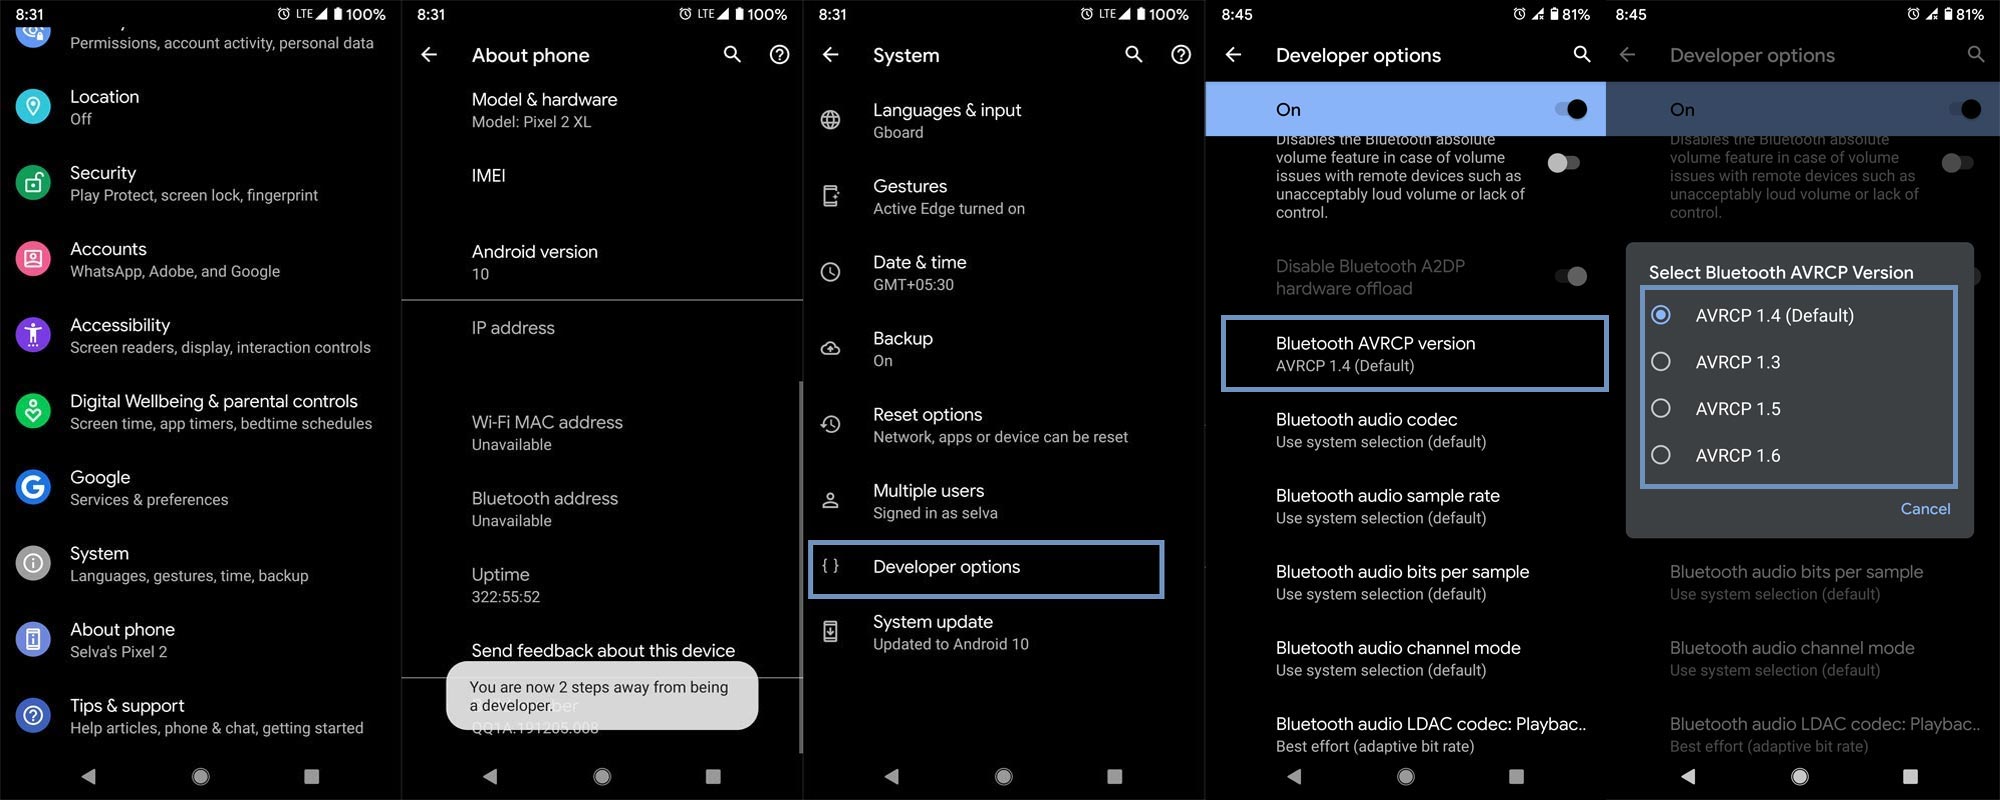 Change Bluetooth AVRCP version Android